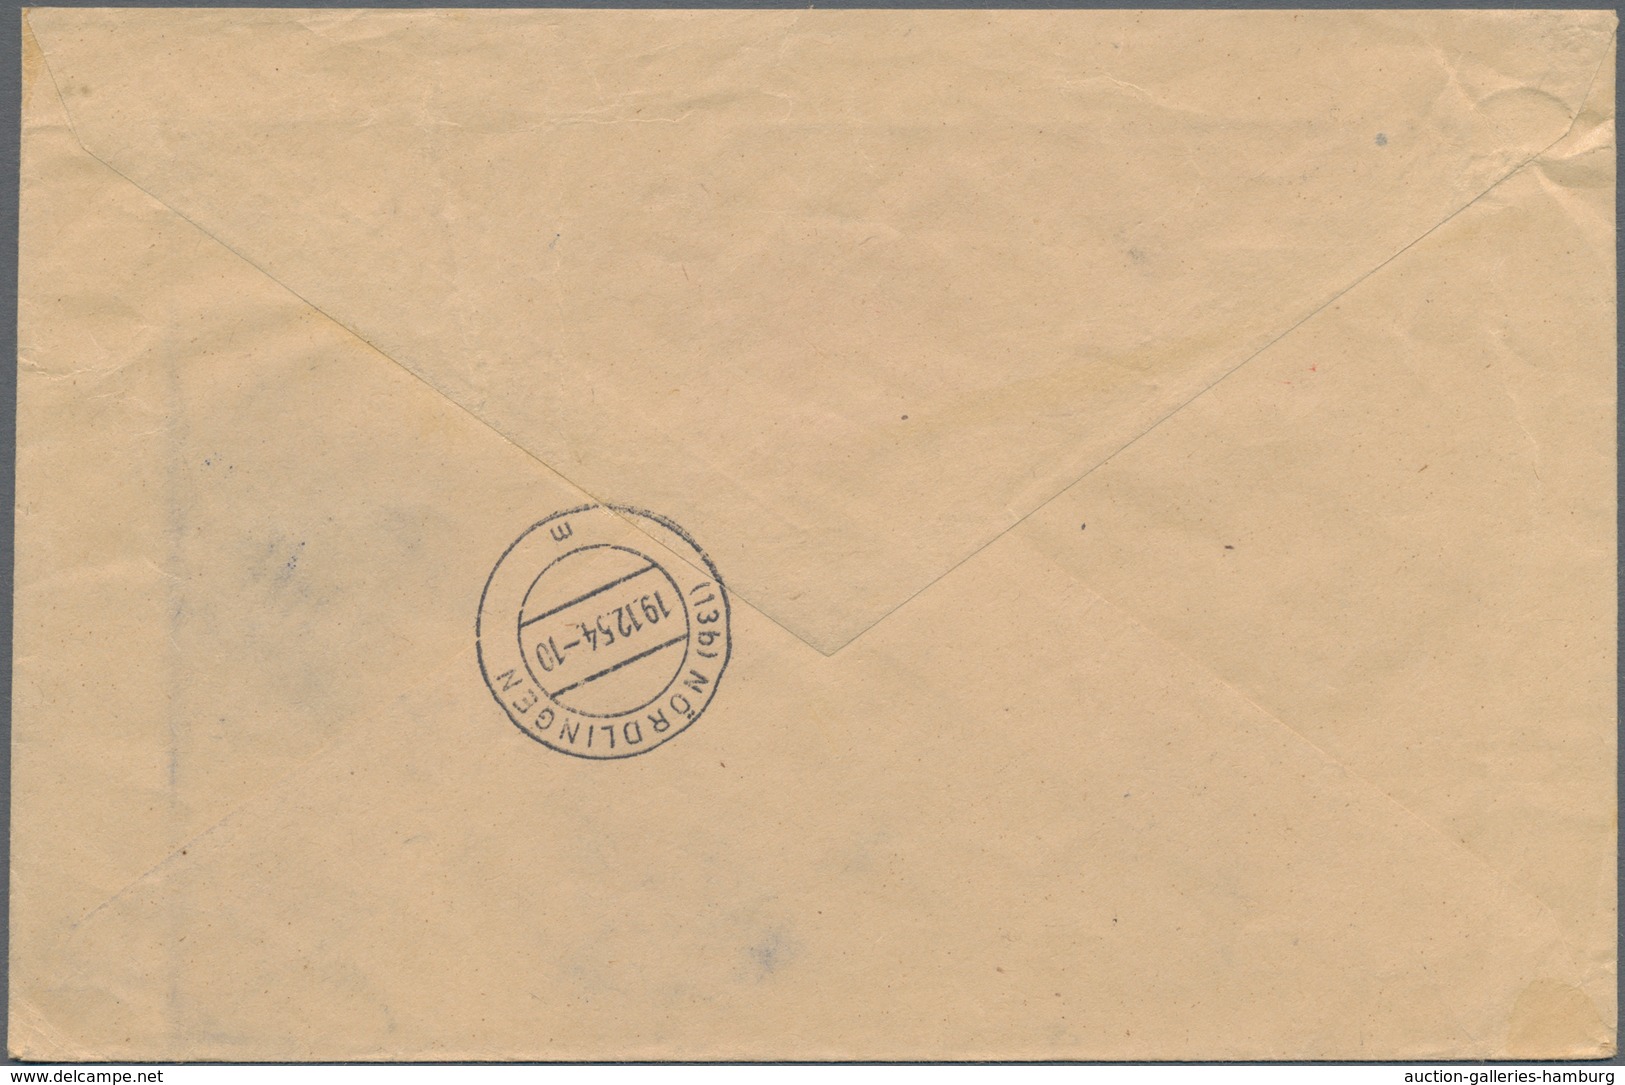 Syrien: 1952/1955, Three Registered Letters From "Republique Syrienne Direction Generale Des Postes" - Syrien